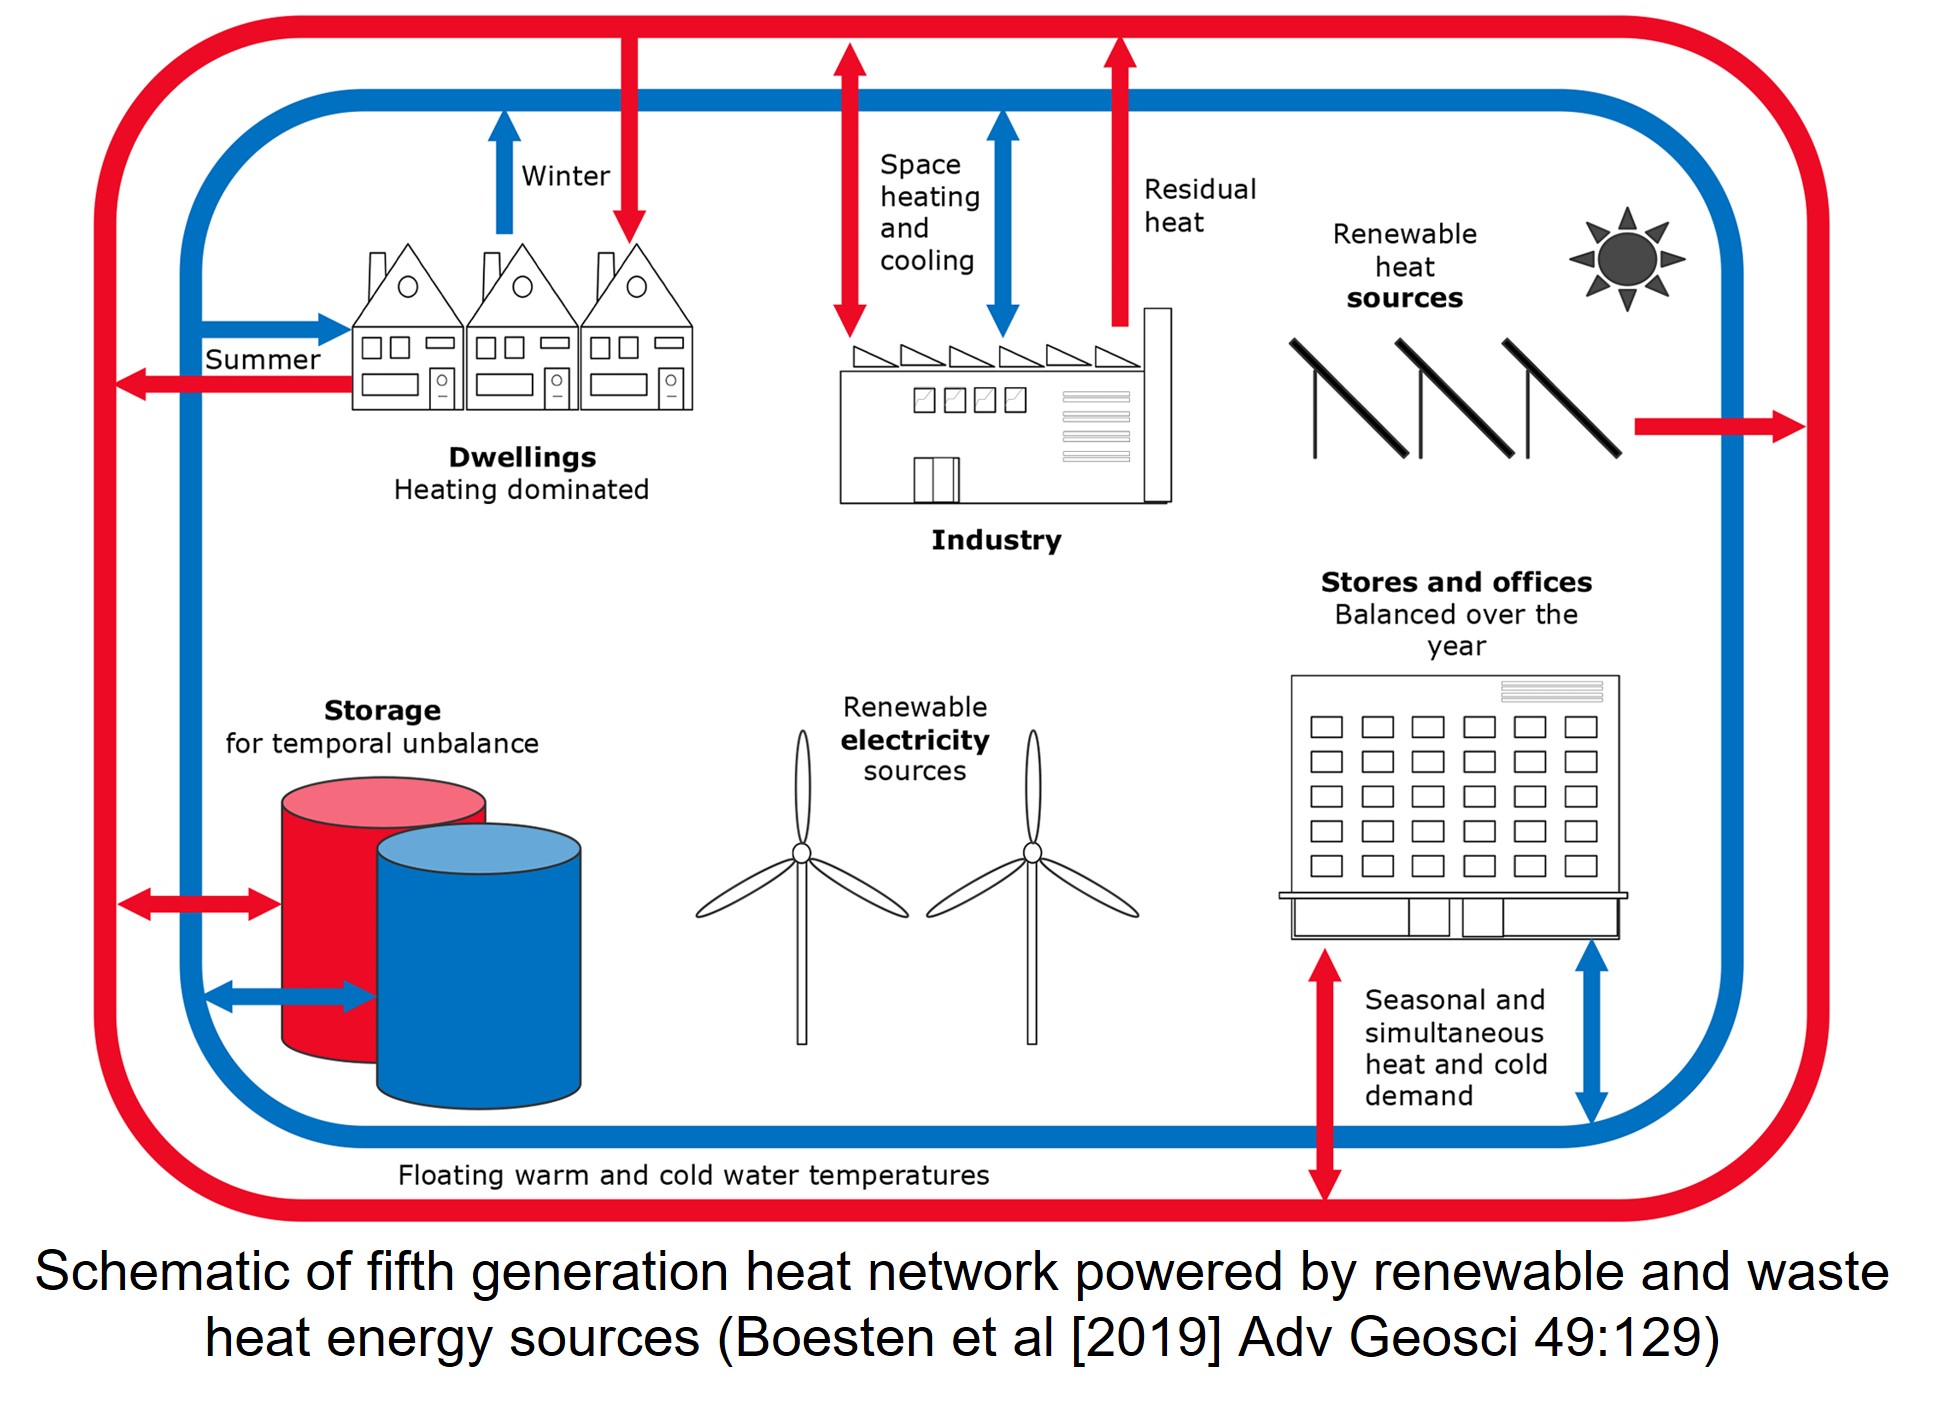 Apartment innovations 2: heat pumps powering heat networks